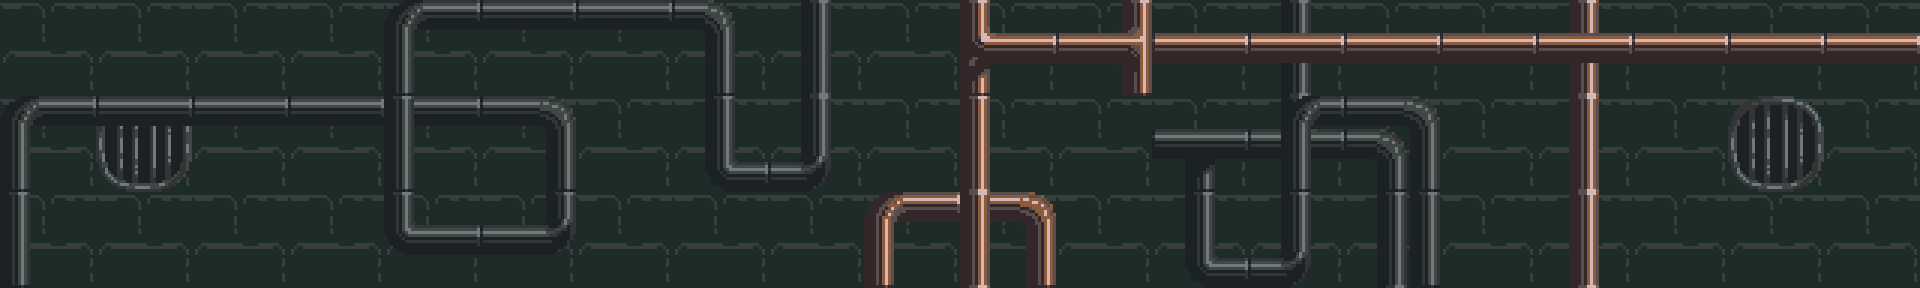 Old Pipes Tileset